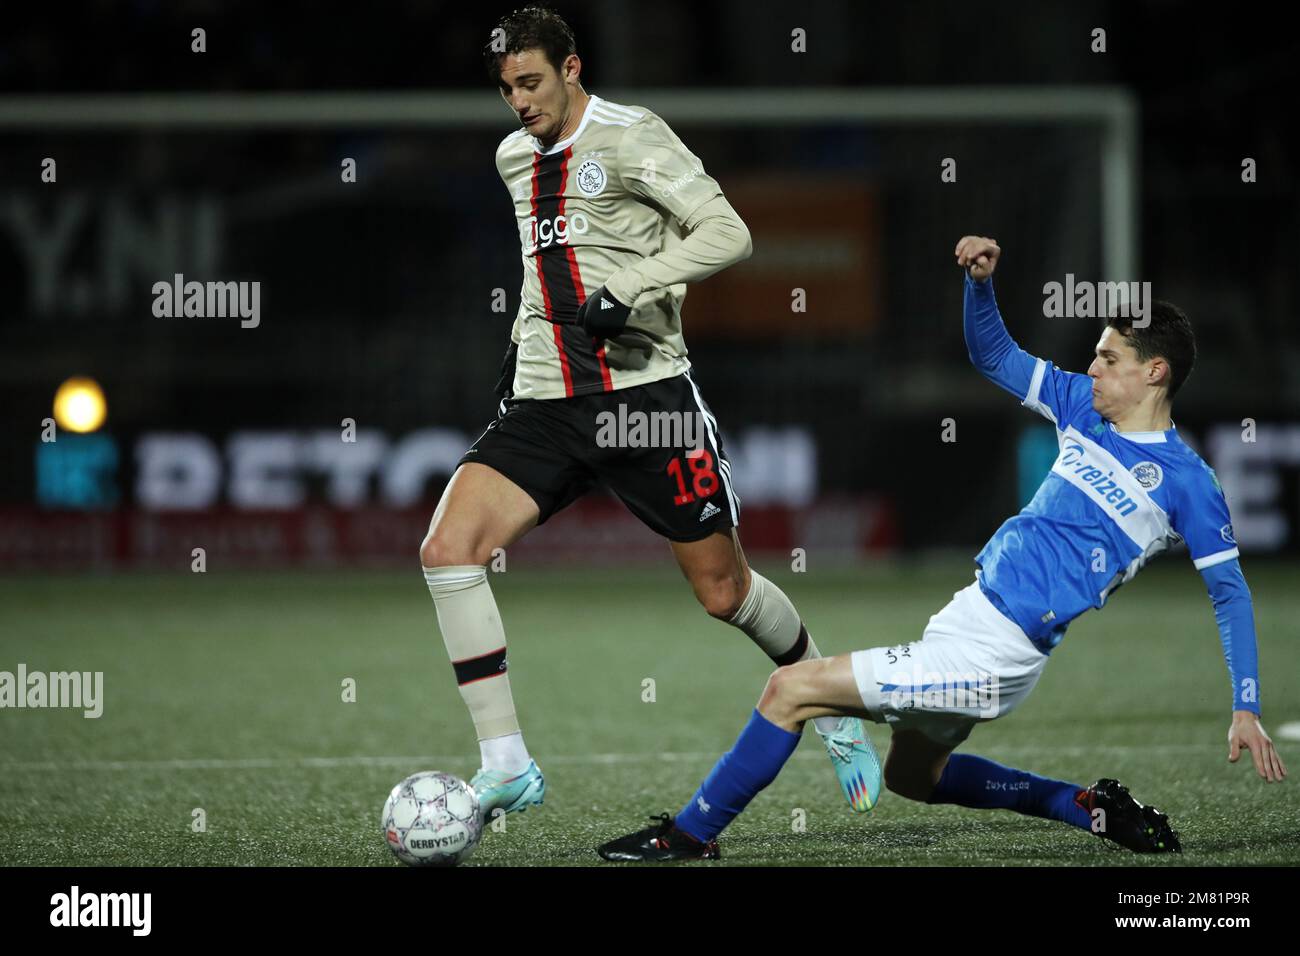 Fjord middelen accessoires DEN BOSCH - (lr) Lorenzo Lucca of Ajax, Stan Maas of FC Den Bosch during  the 2nd round of the Toto KNVB Cup between FC Den Bosch and Ajax at Stadion  De